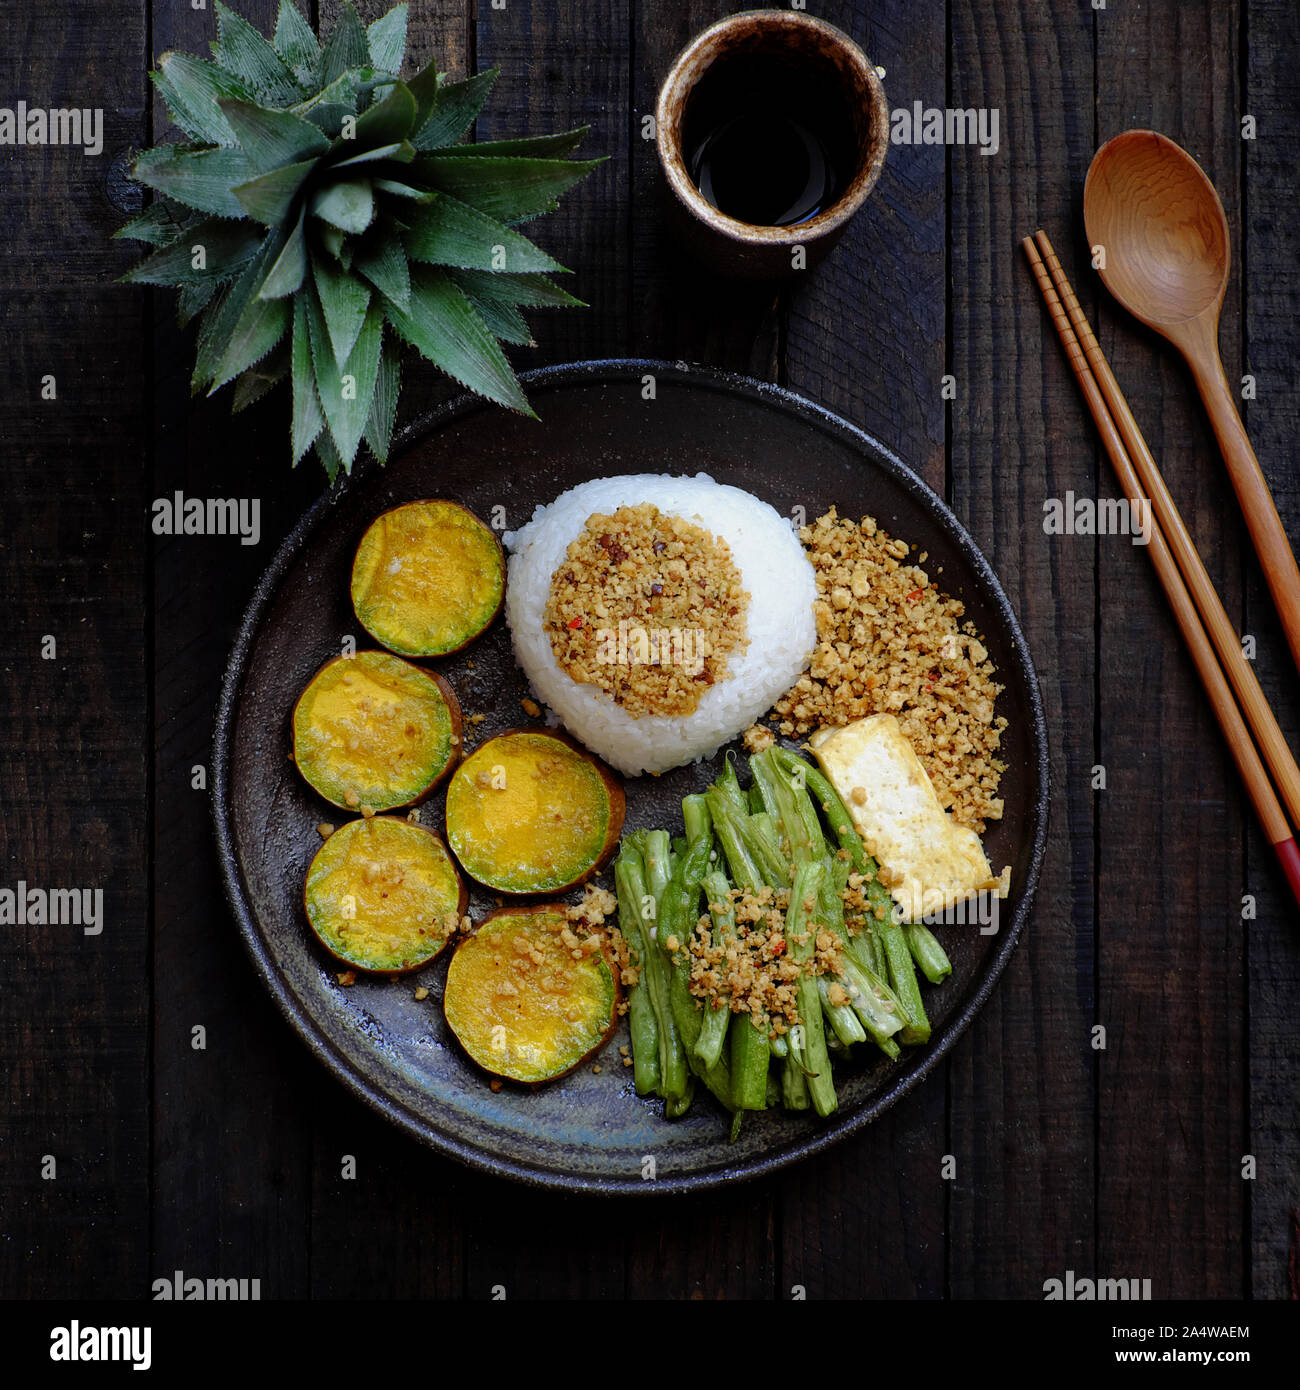 Top view black plate of rice dish for lunch meal, vegan homemade Vietnamese eating, vegetarian food with tofu, grilled vegetables, cowpea, nutrition, Stock Photo